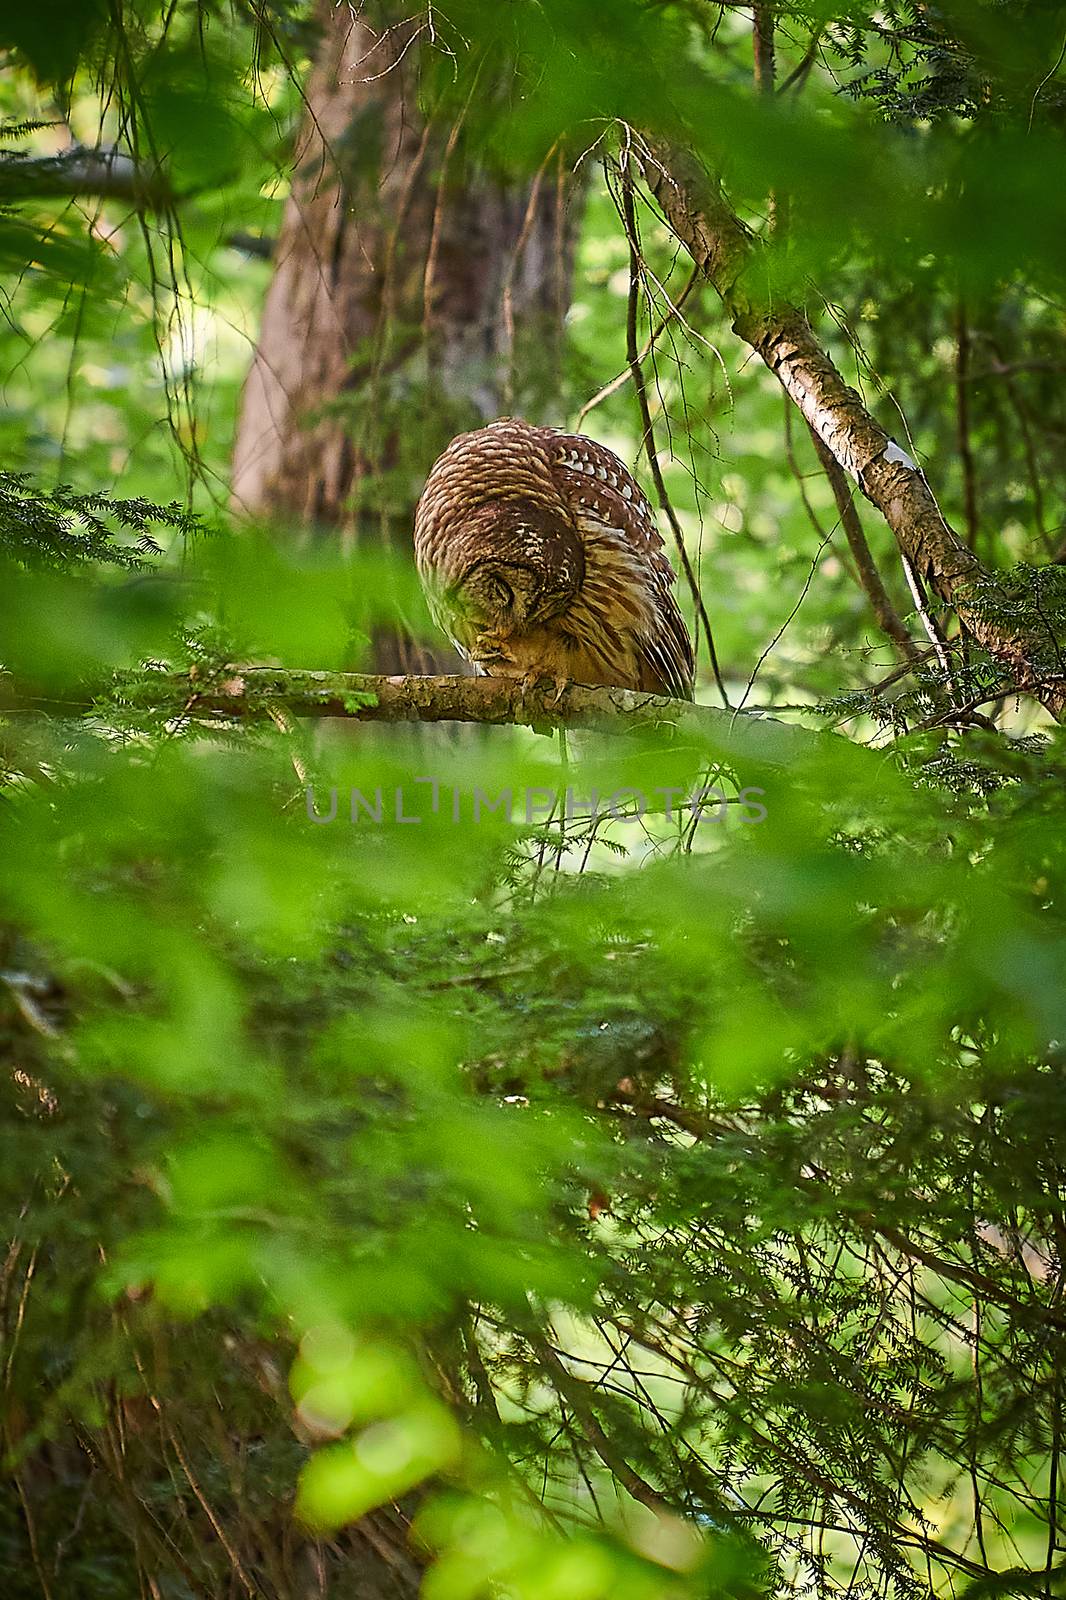 Adult Barred Owl eating a small captured pray.